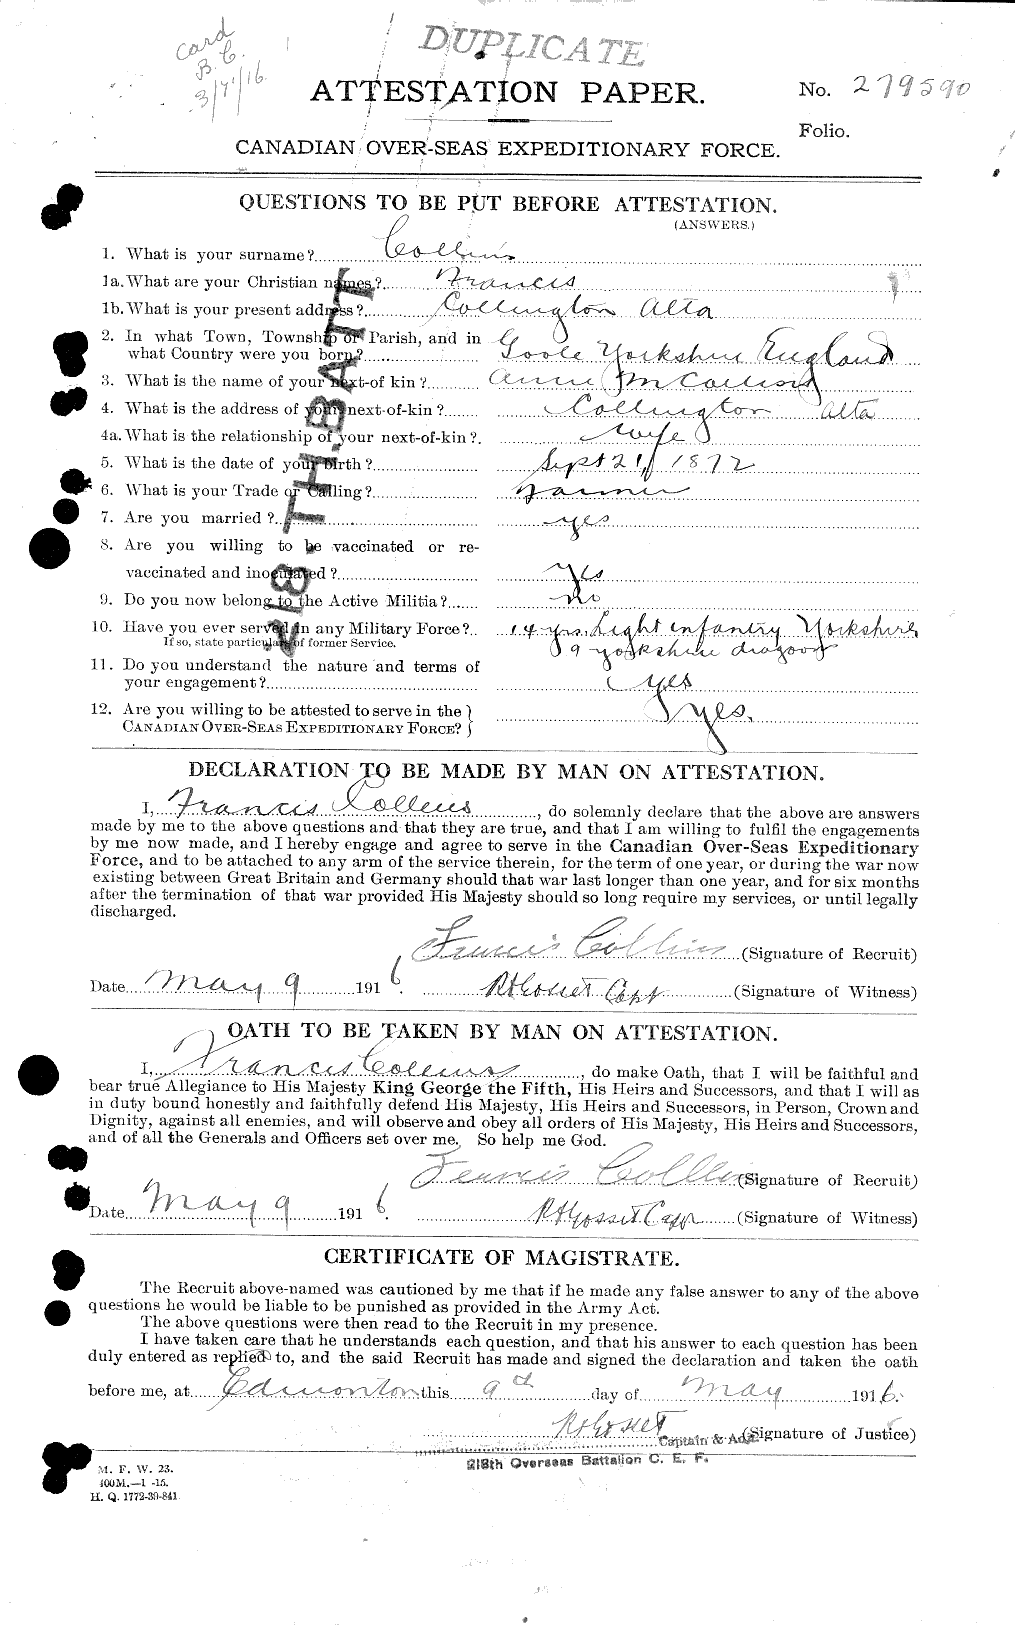 Personnel Records of the First World War - CEF 037785a